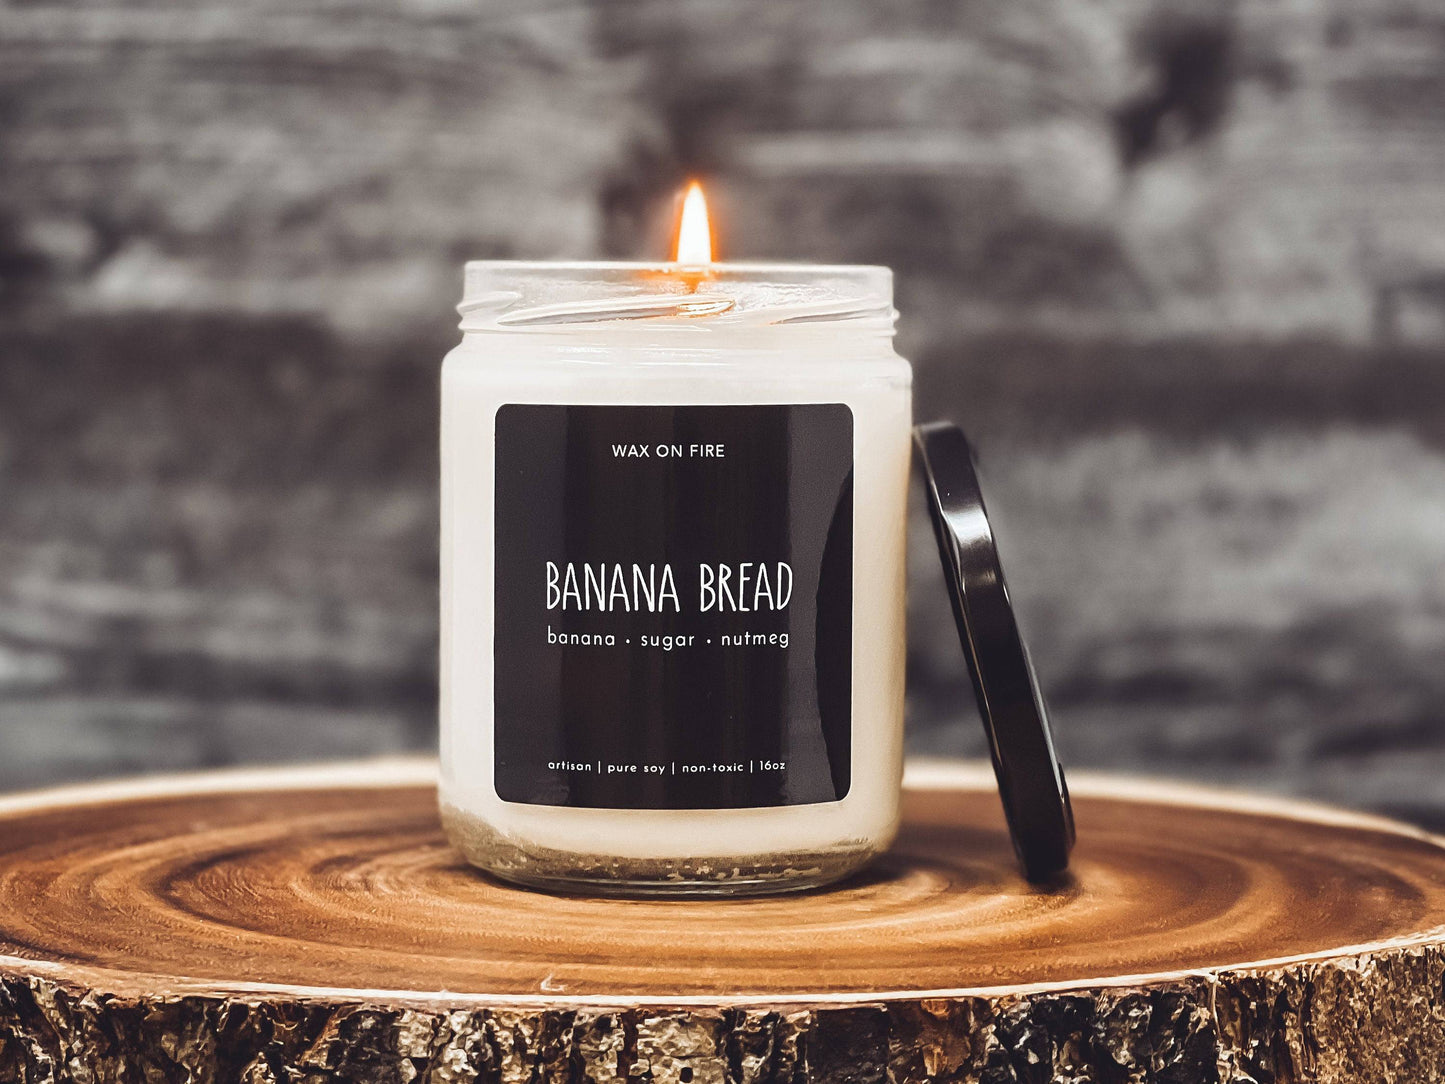 Banana Bread | Non-Toxic Soy Candle - Wax On Fire